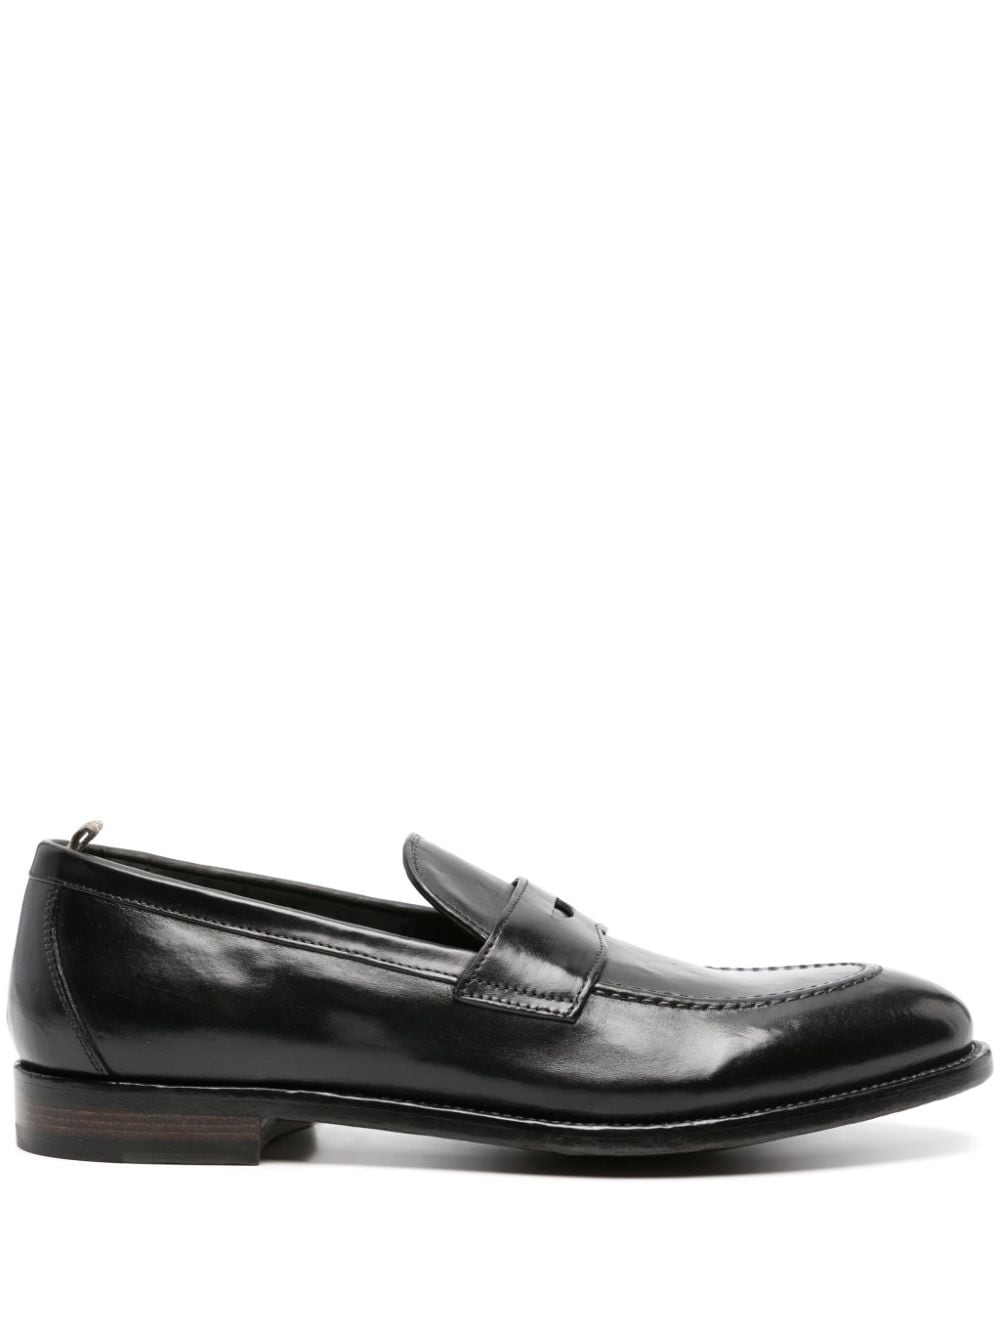 Tulane 003 leather penny loafers